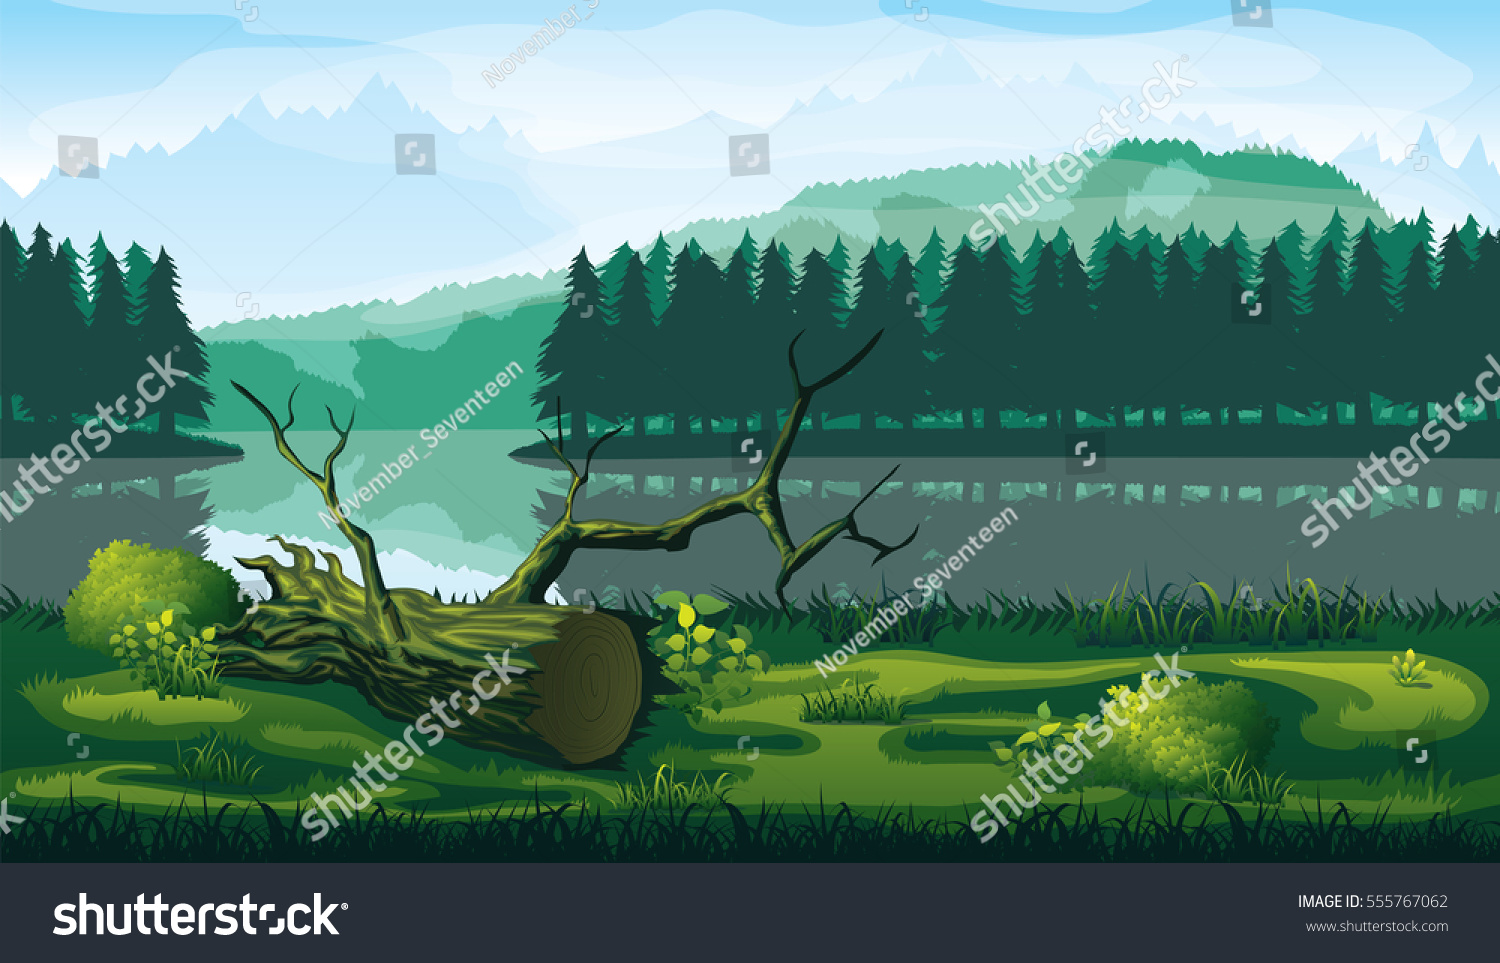 High Quality Horizontal Seamless Background Landscape Stock Vector